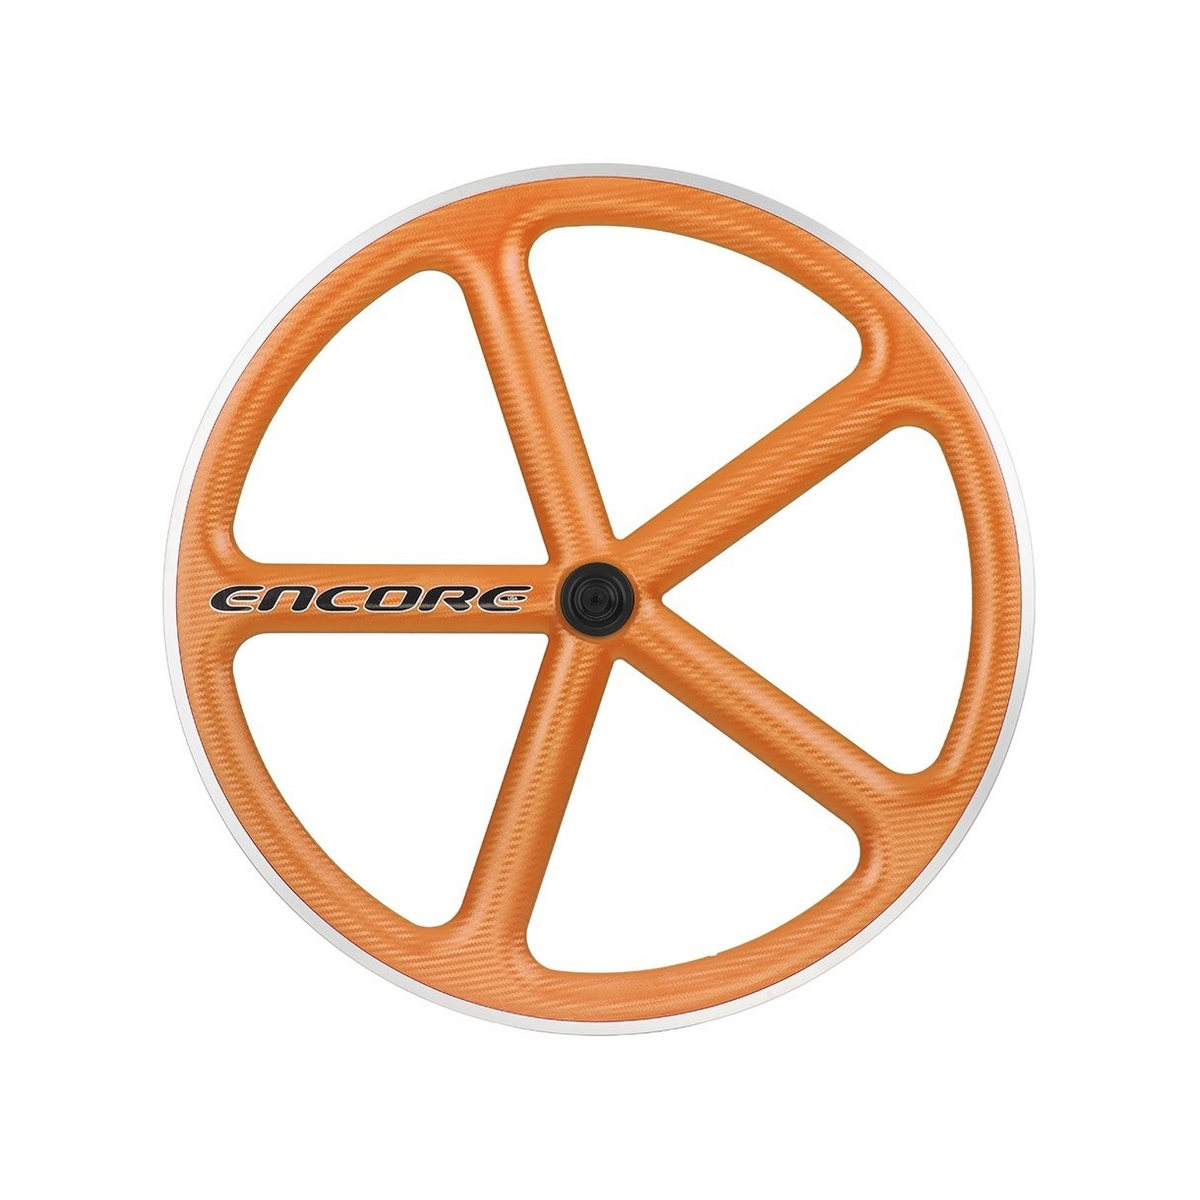 roue arrière 700c track 5 rayons carbone tissage orange msw